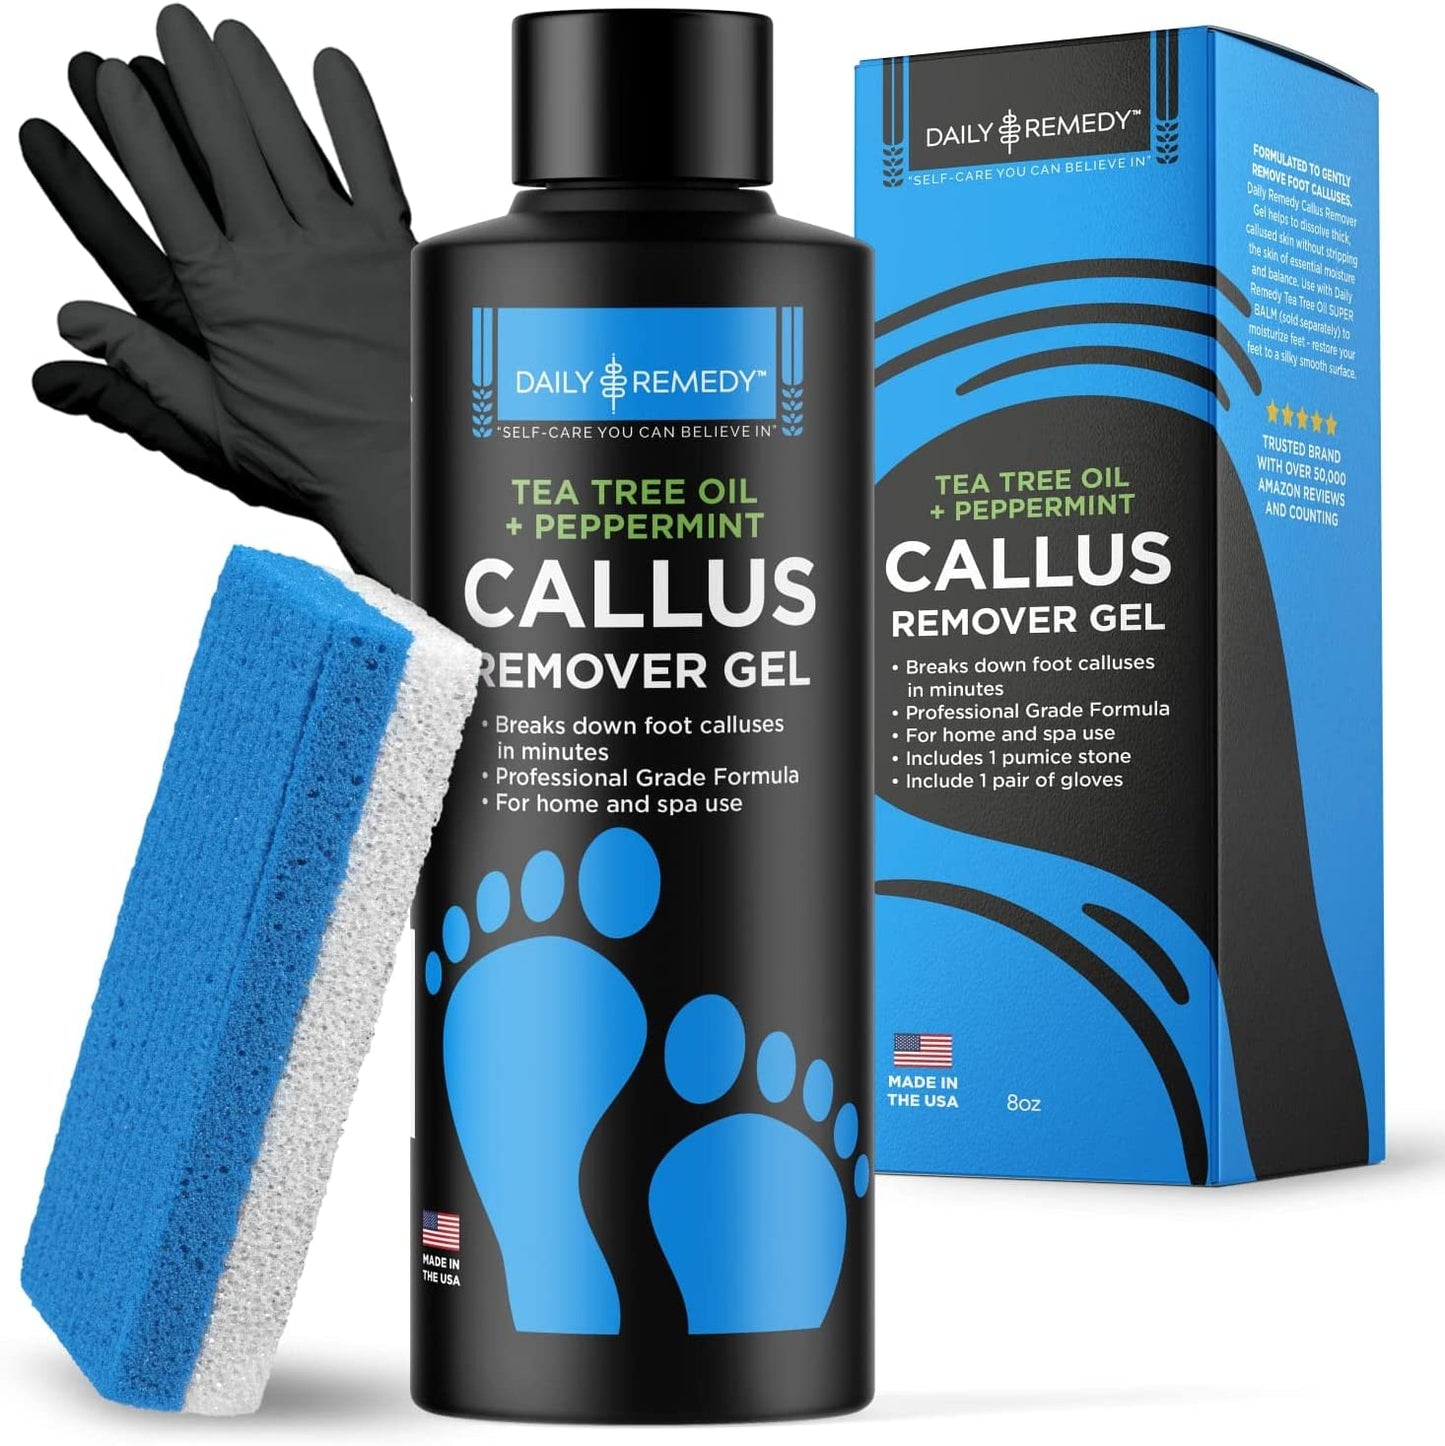 Foot Callus Remover Gel 6oz by Love, Lori - Callus Remover for Feet & Dead Skin Remover for Feet - Works with Foot Scrubber, Pumice Stone for Soft